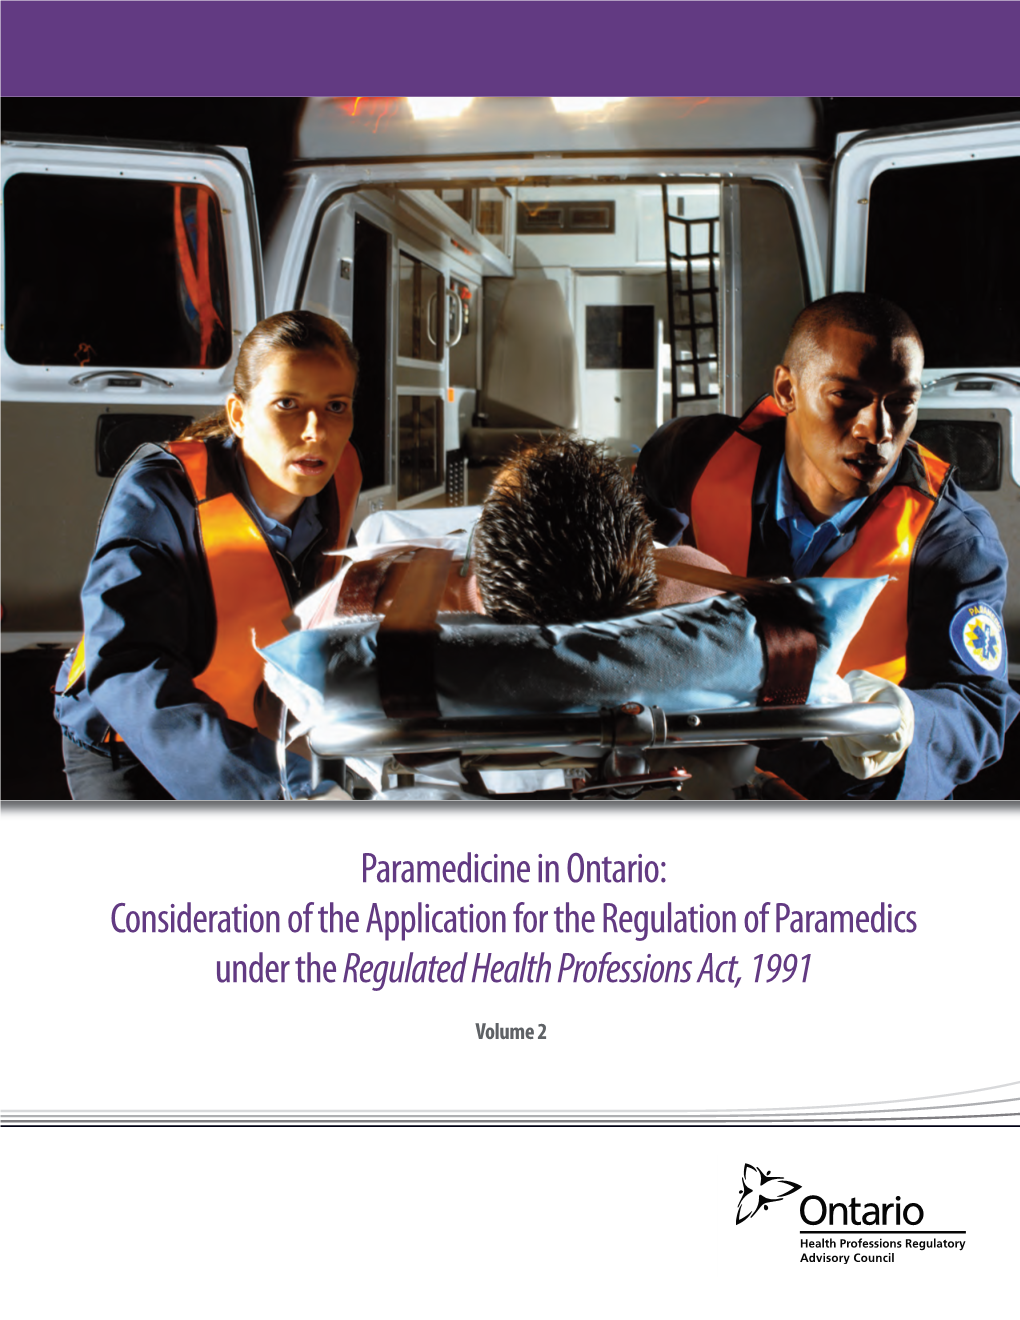 Paramedicine in Ontario: Consideration of the Application for the Regulation of Paramedics Under the Regulated Health Professions Act, 1991